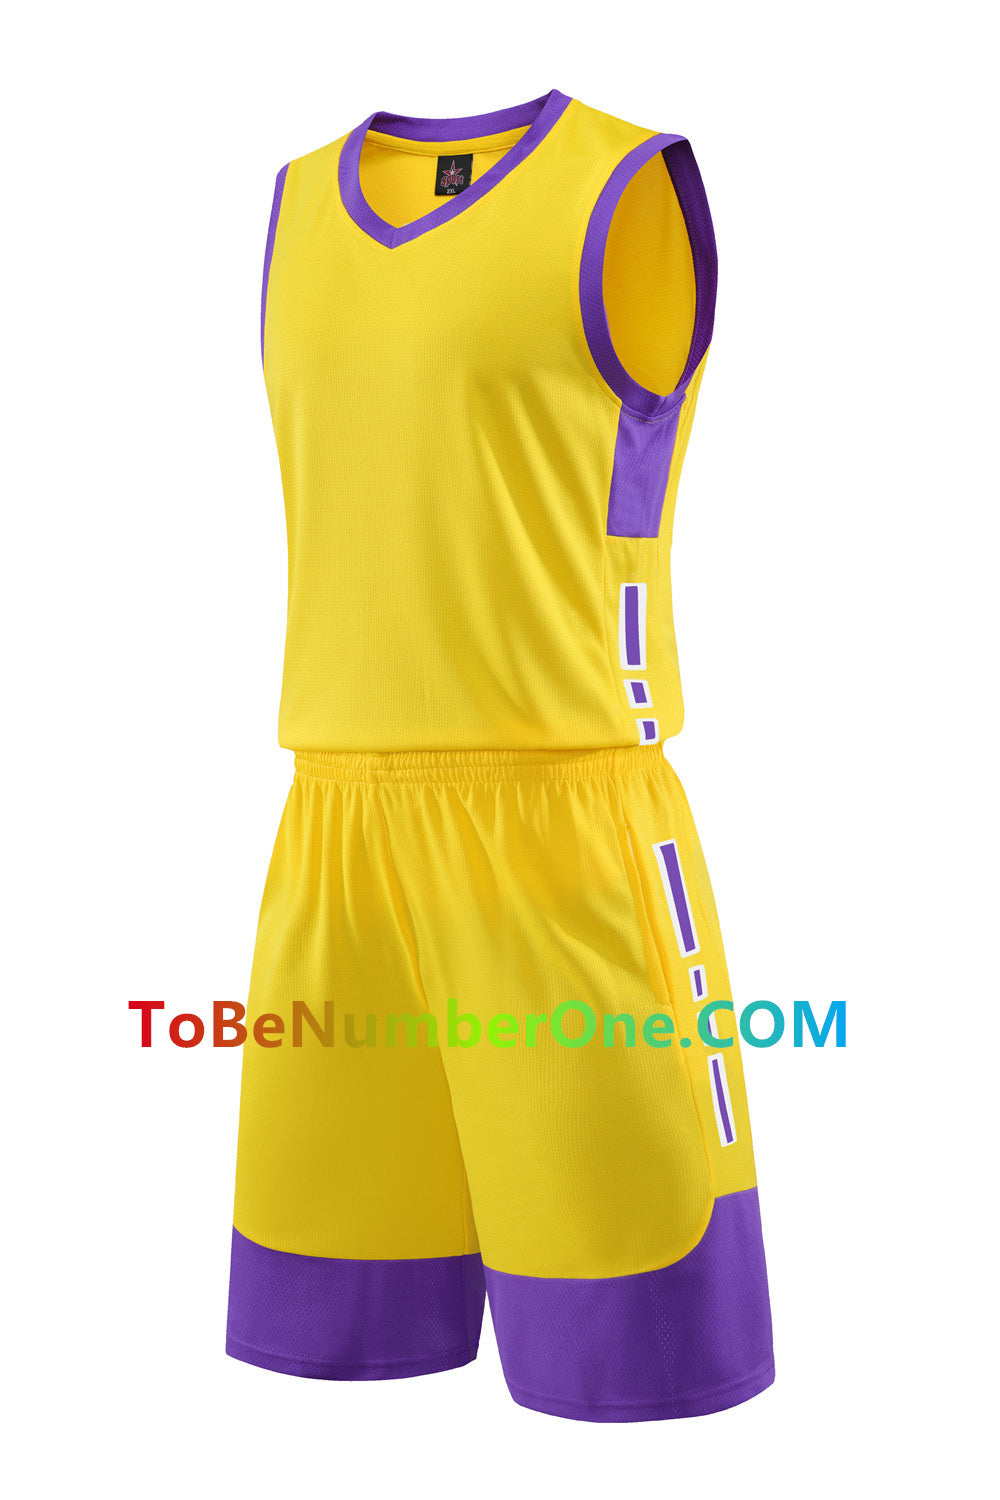 Customize instock High Quality Quick-drying jerseys basketball jerseys&shorts with pocket 215# print with team name , player and number.